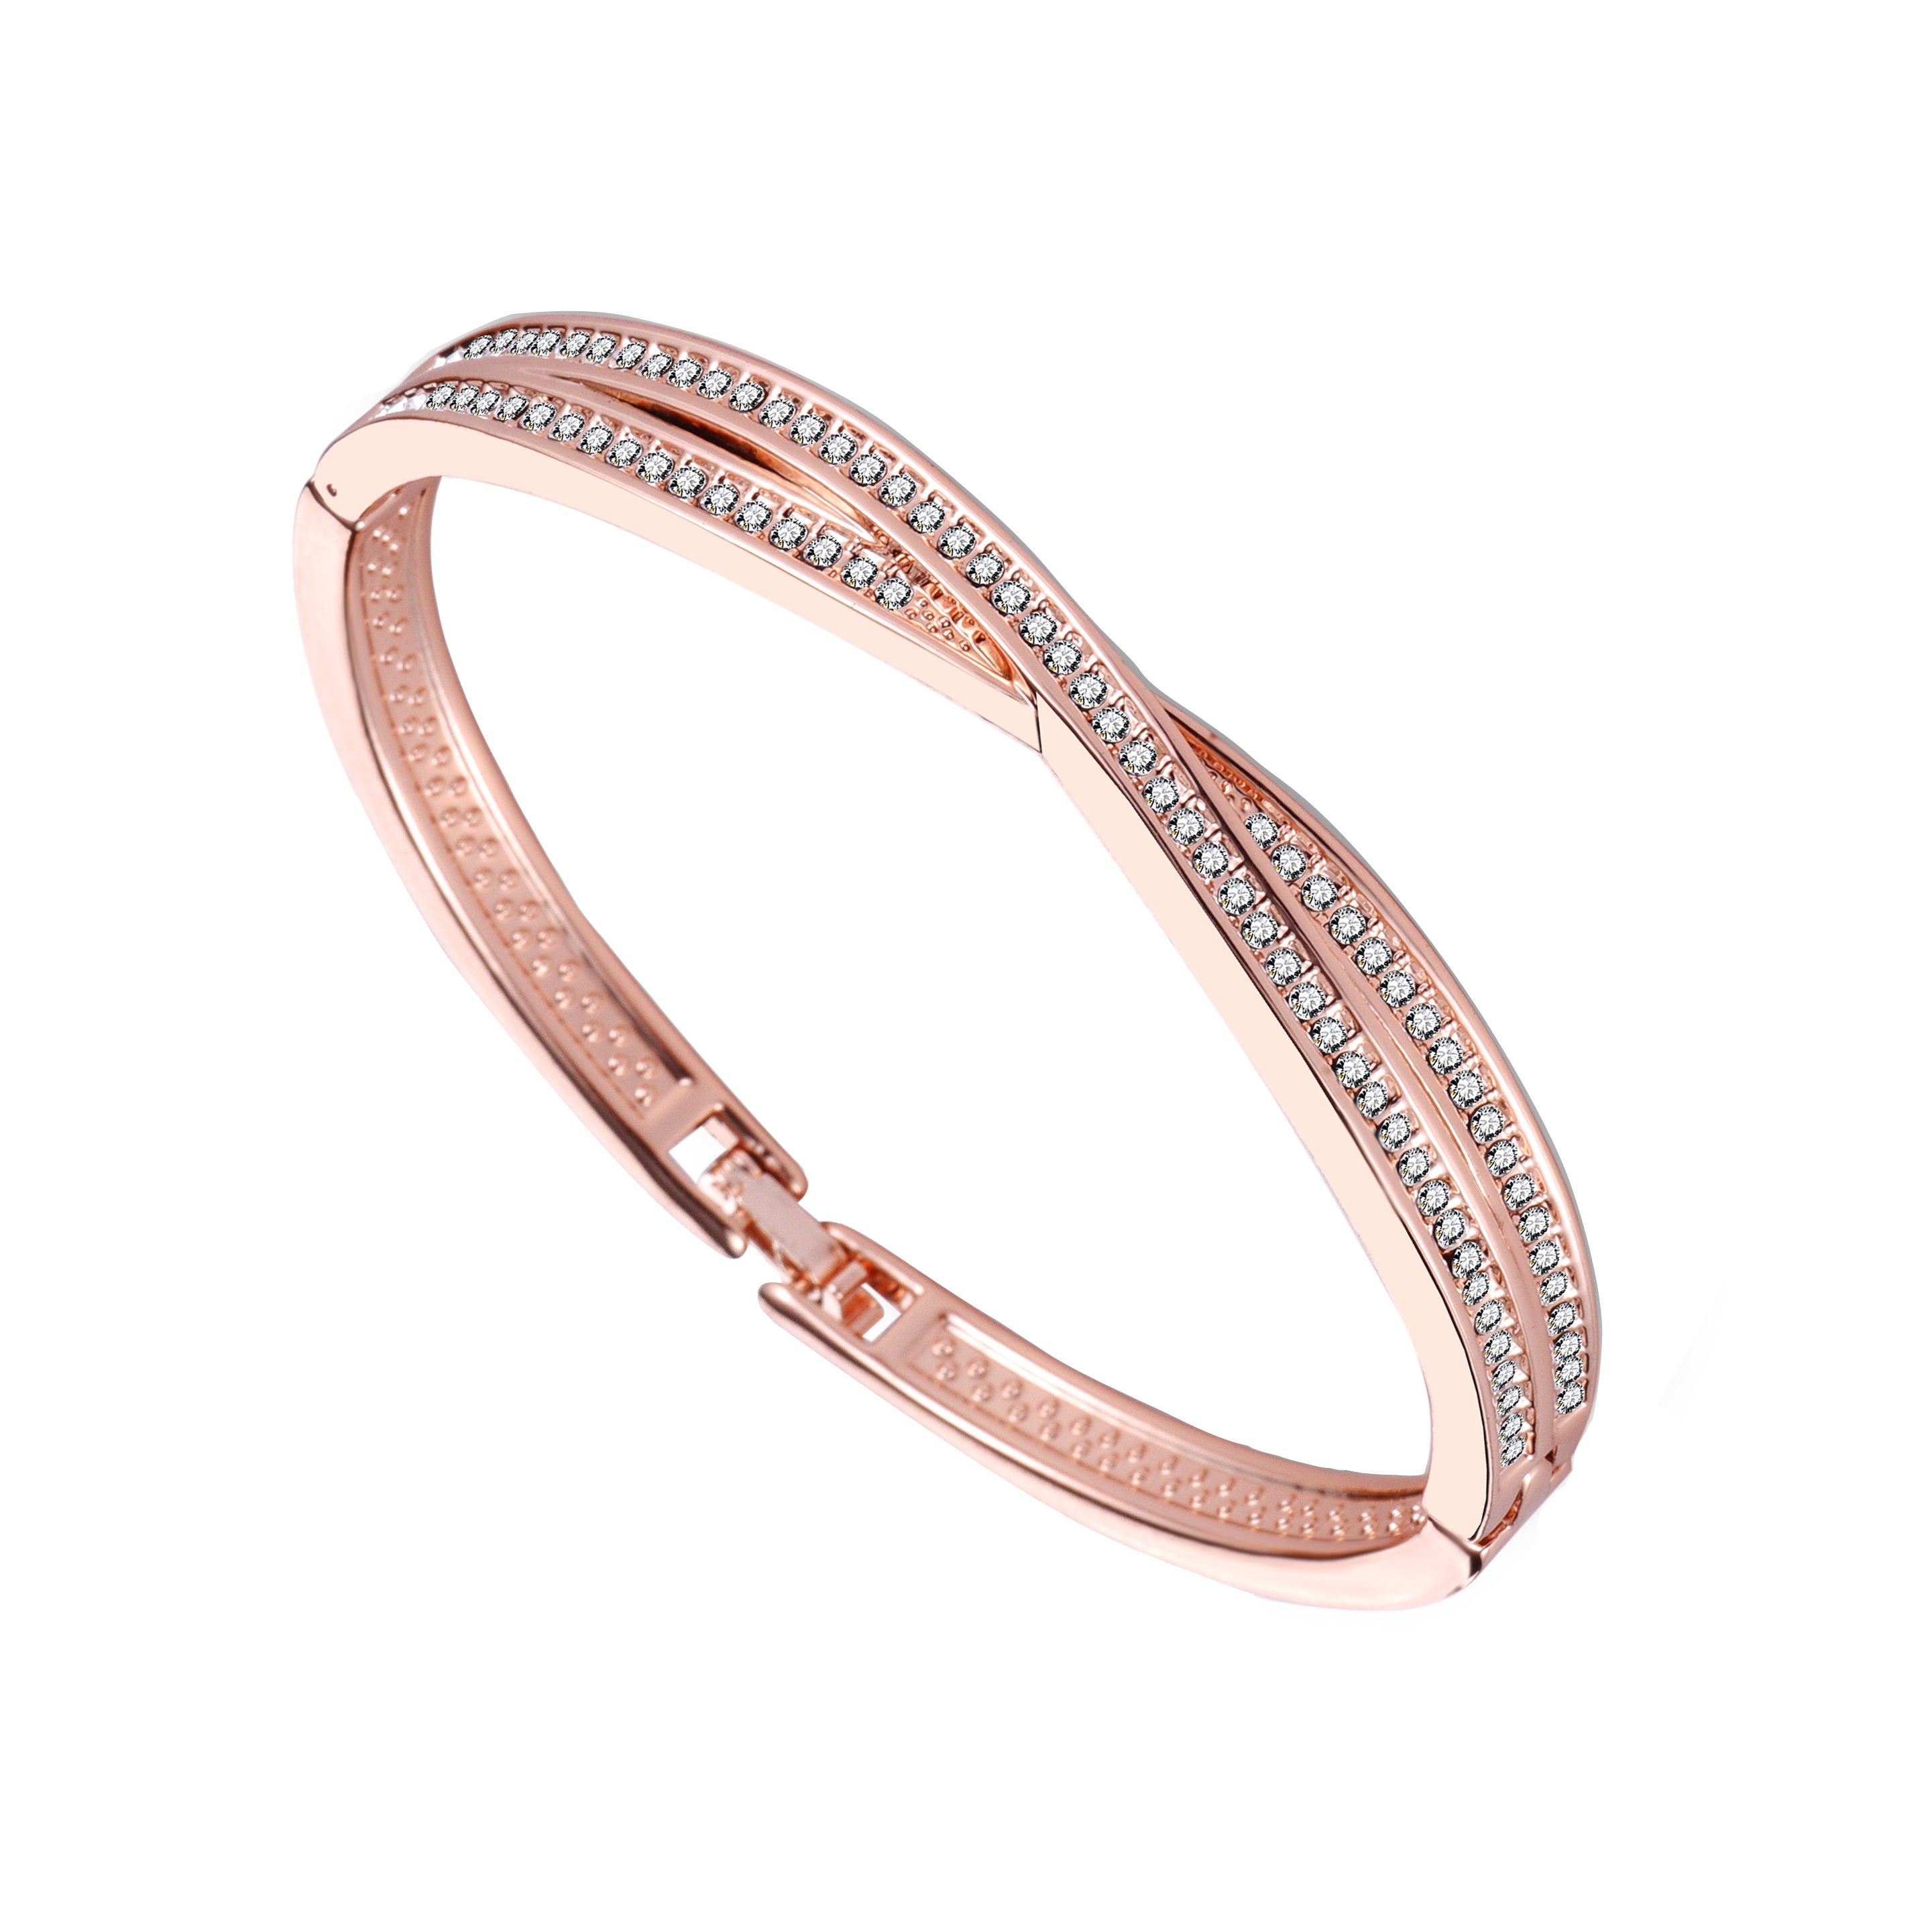 Rose Gold Plated Crossover Bangle Created with Zircondia® Crystals by Philip Jones Jewellery